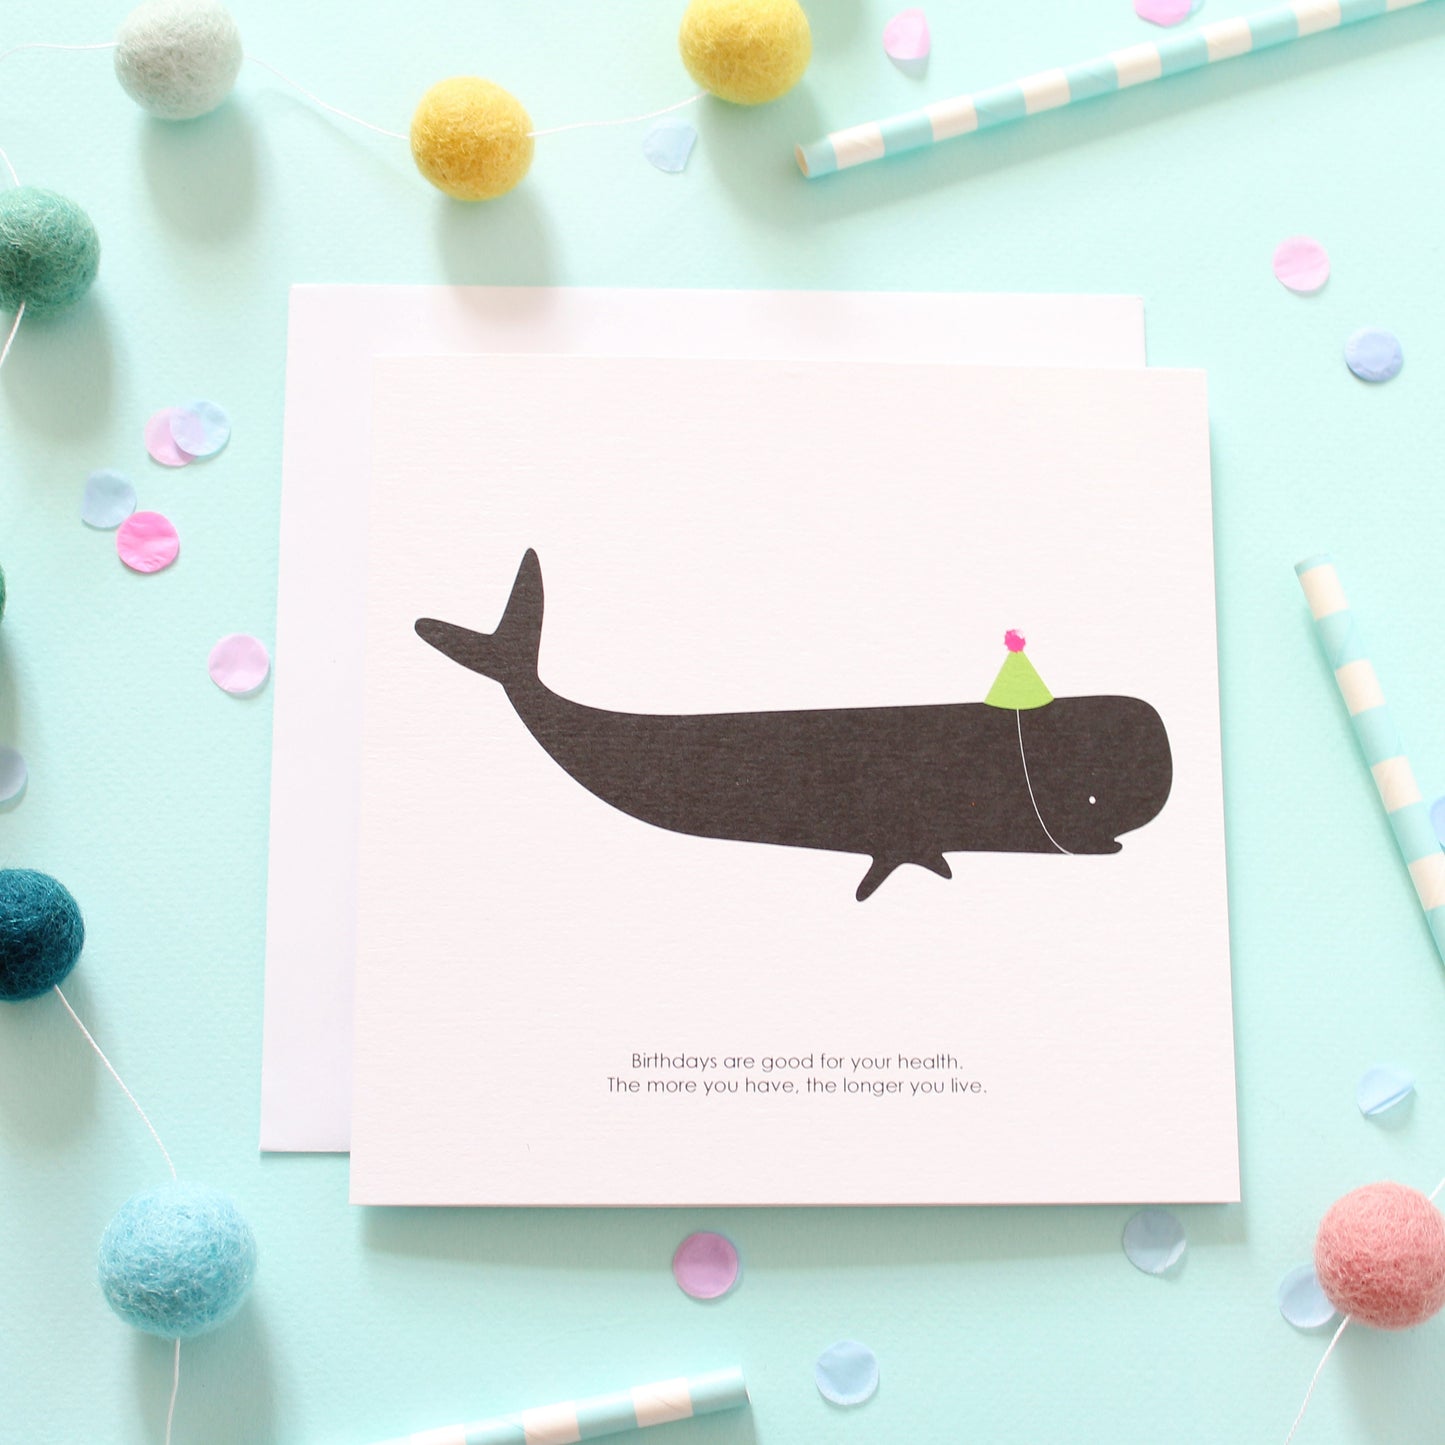 Birthdays are good for you - Whale Card